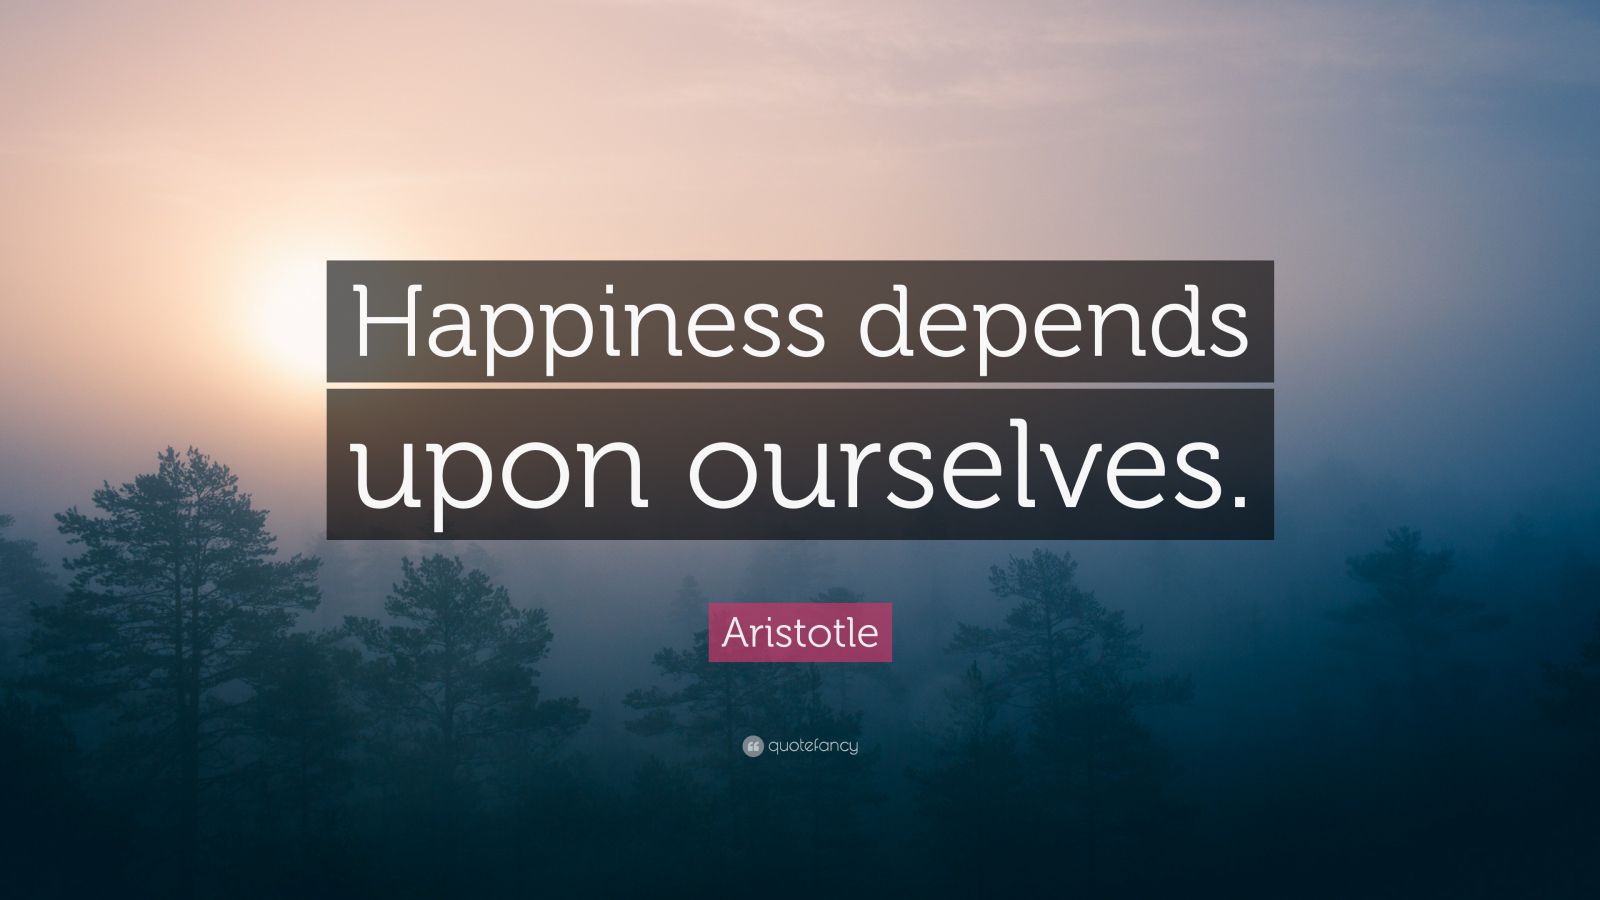 Aristotle Quote: “Happiness depends upon ourselves.” (19 wallpapers